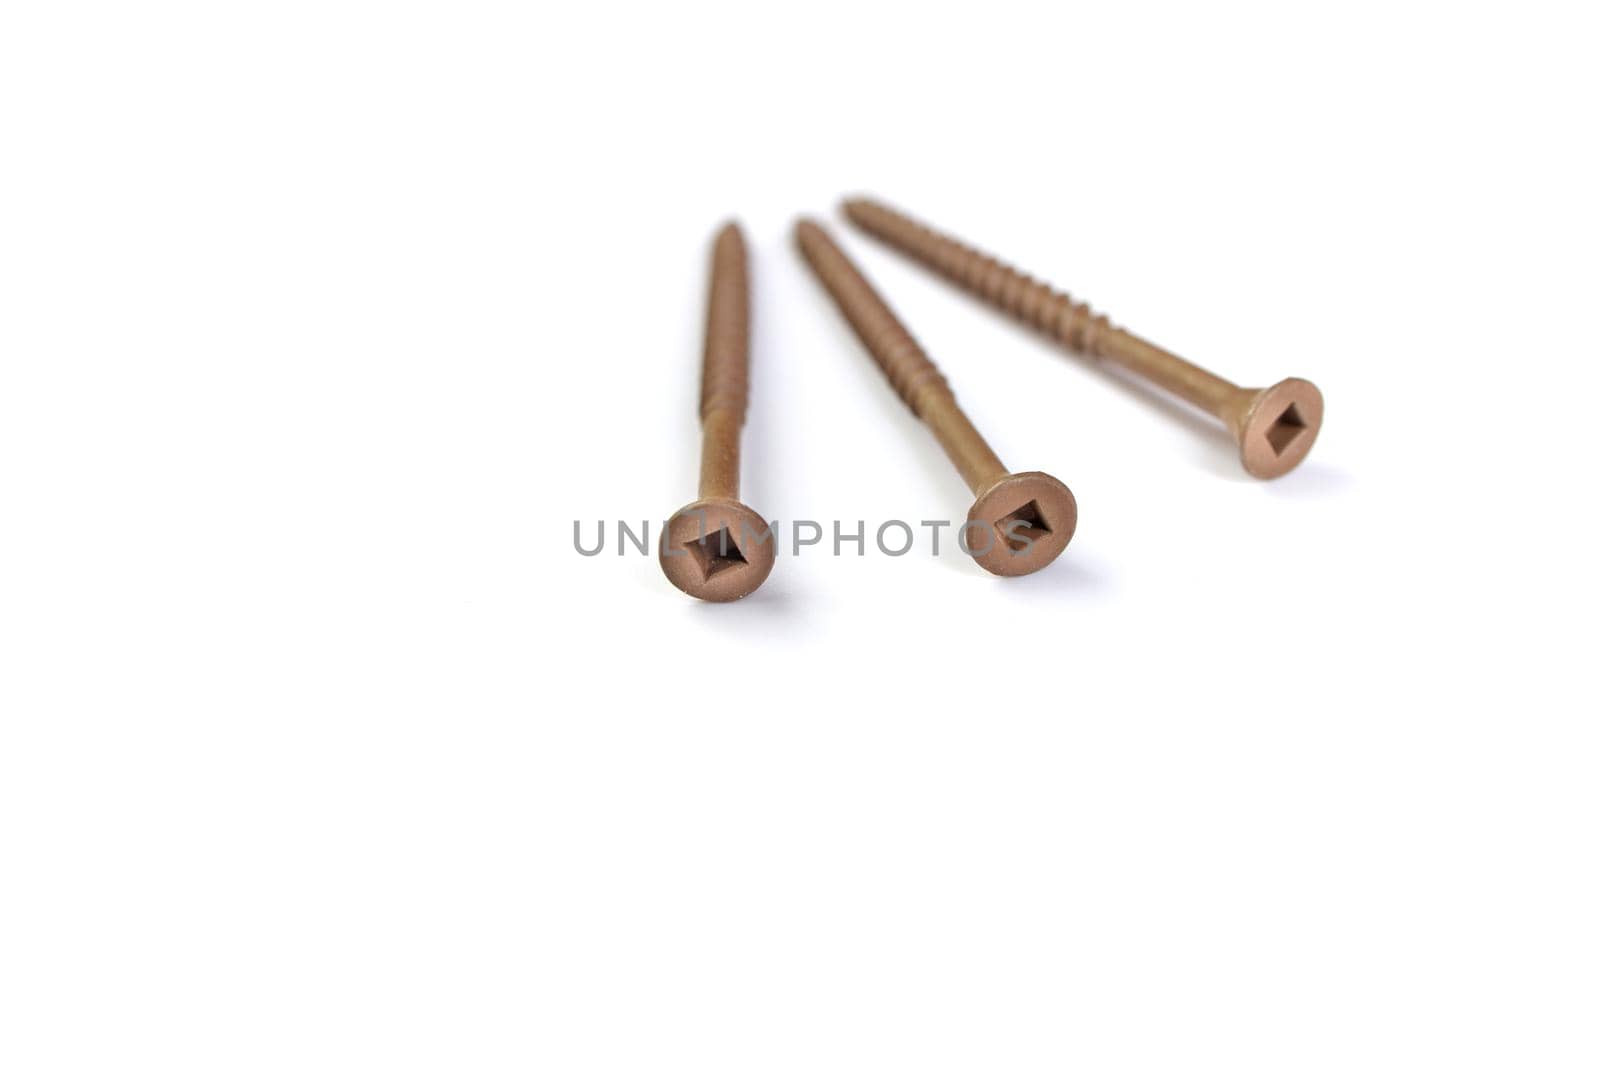 Brown Deck Screws Isolated on a White Background by markvandam